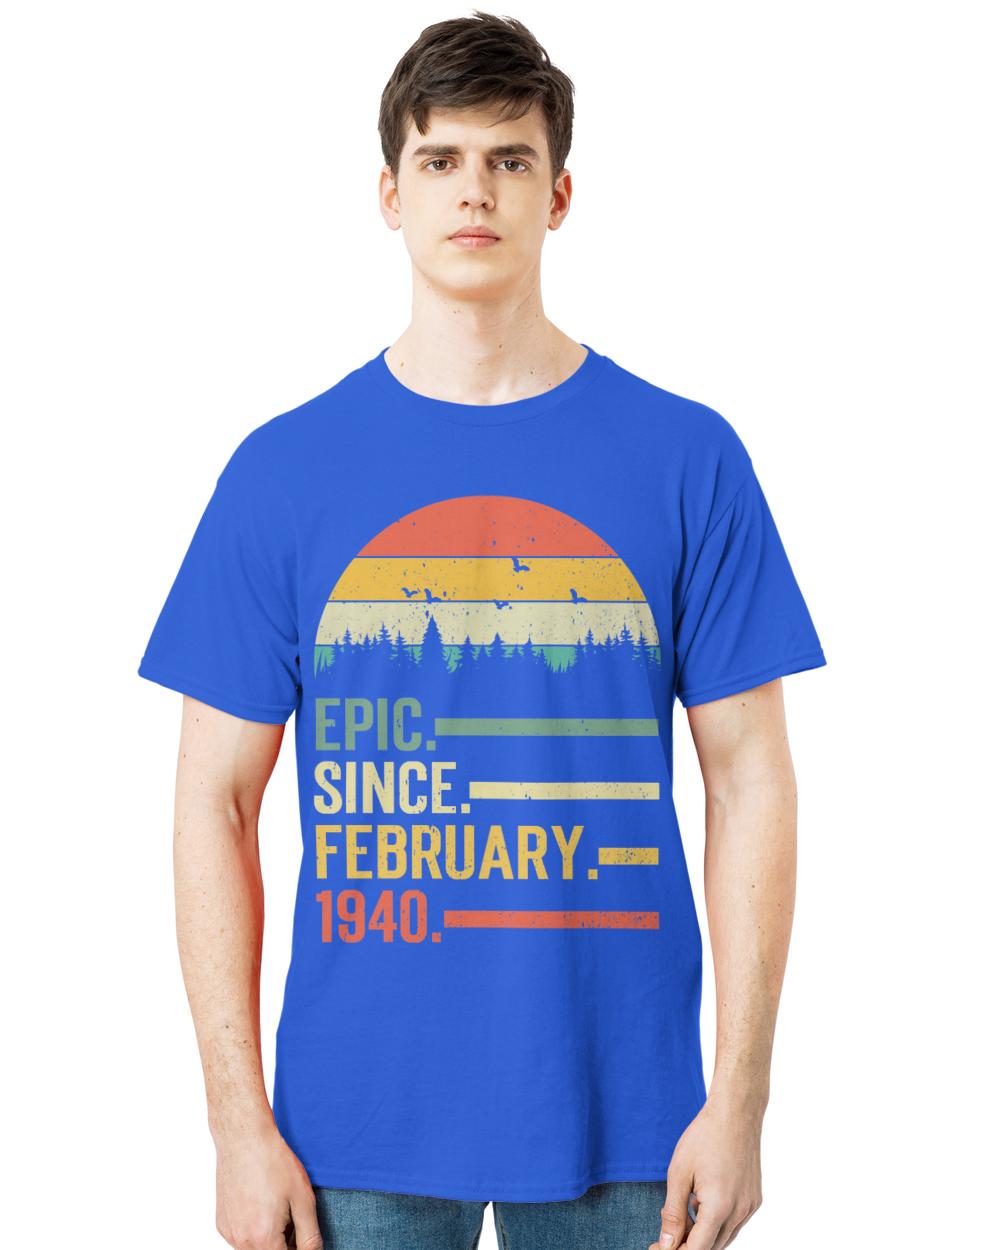 Official epic since february  t-shirt